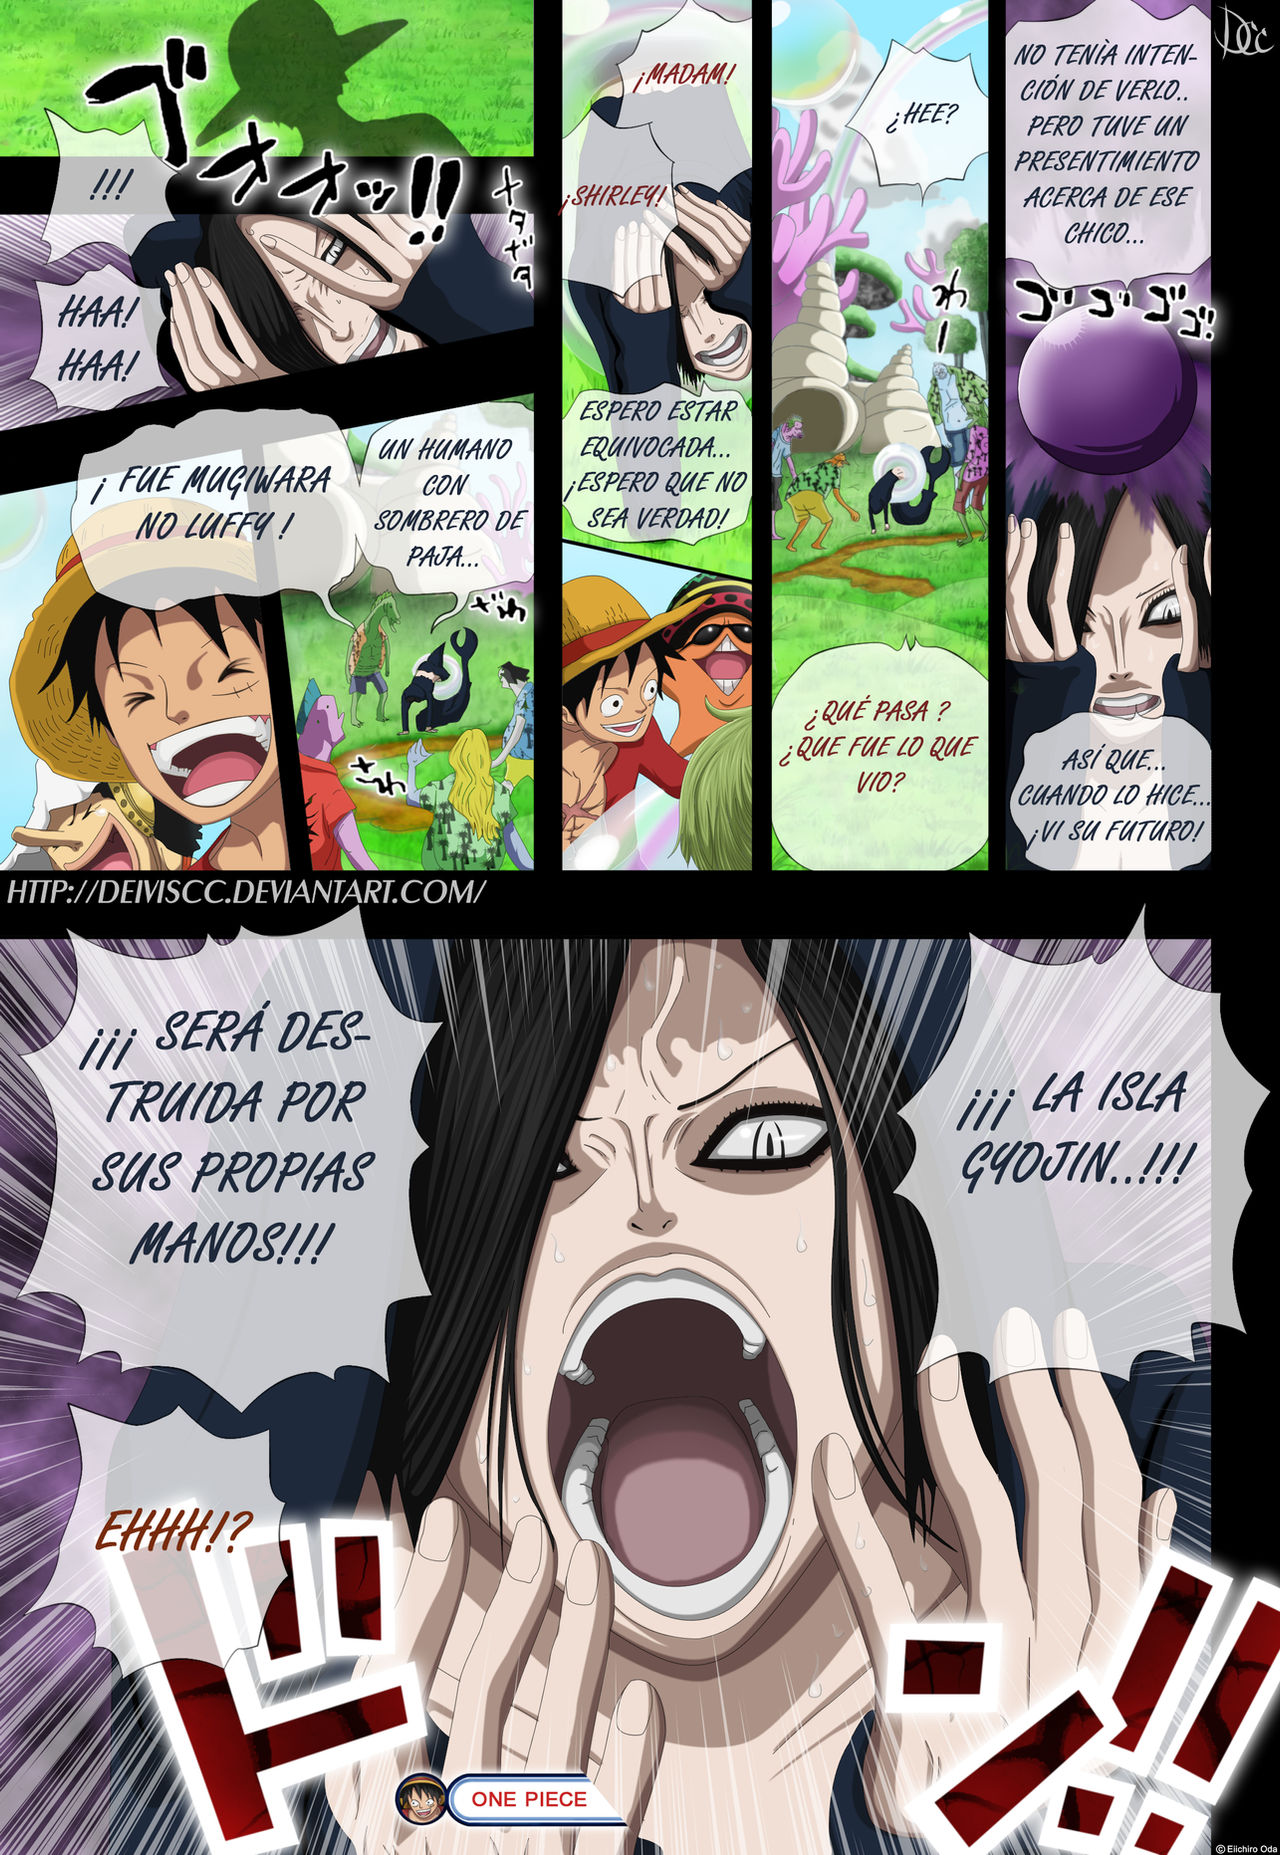 One Piece 610 Page 15 By Deiviscc On Deviantart